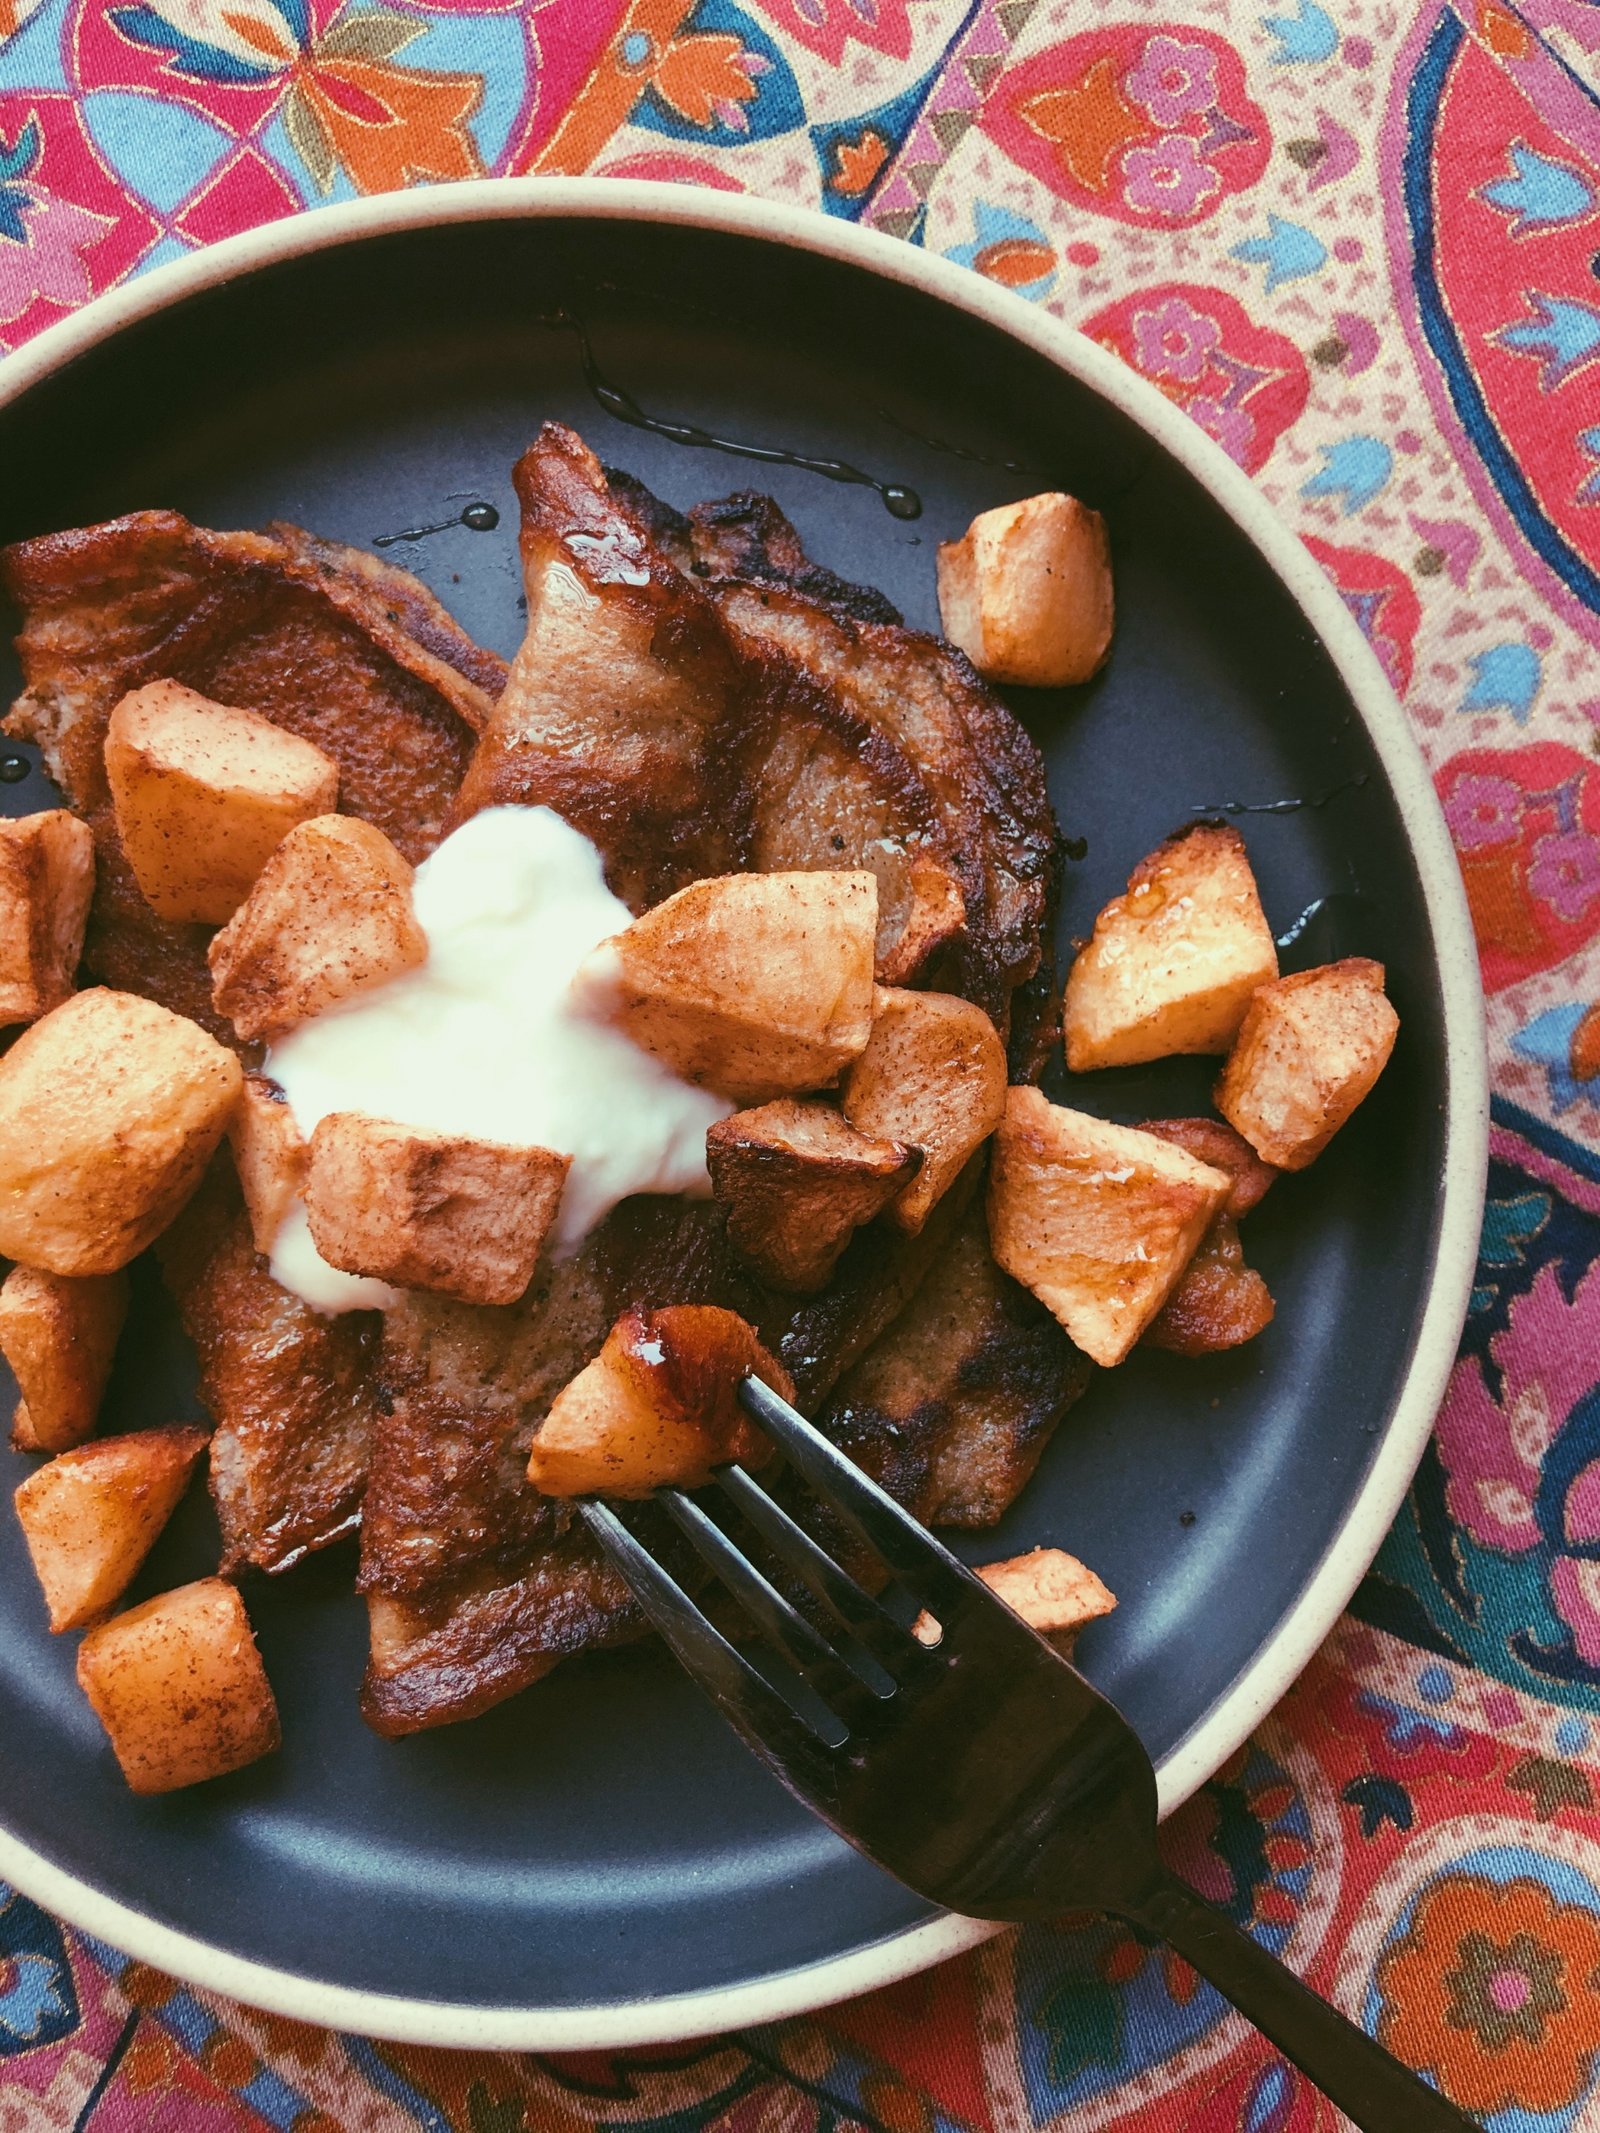 cinnamon chai crepes with baked apples and yogurt (grain free, scd diet)